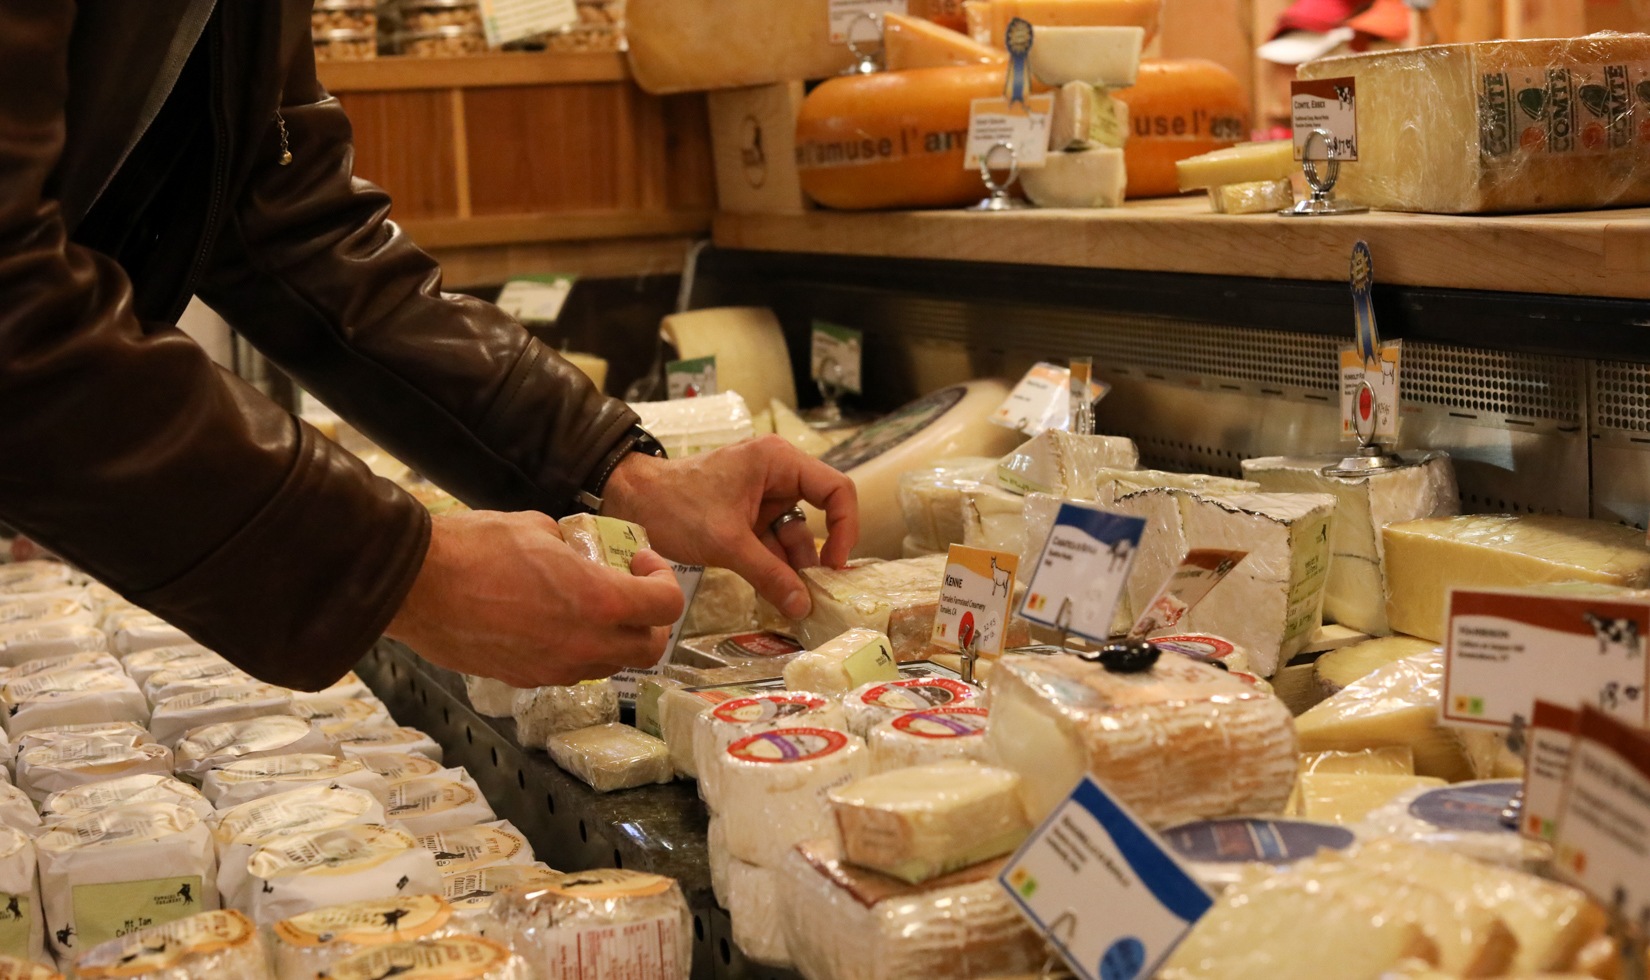 a person wrapping the cheese and putting tags